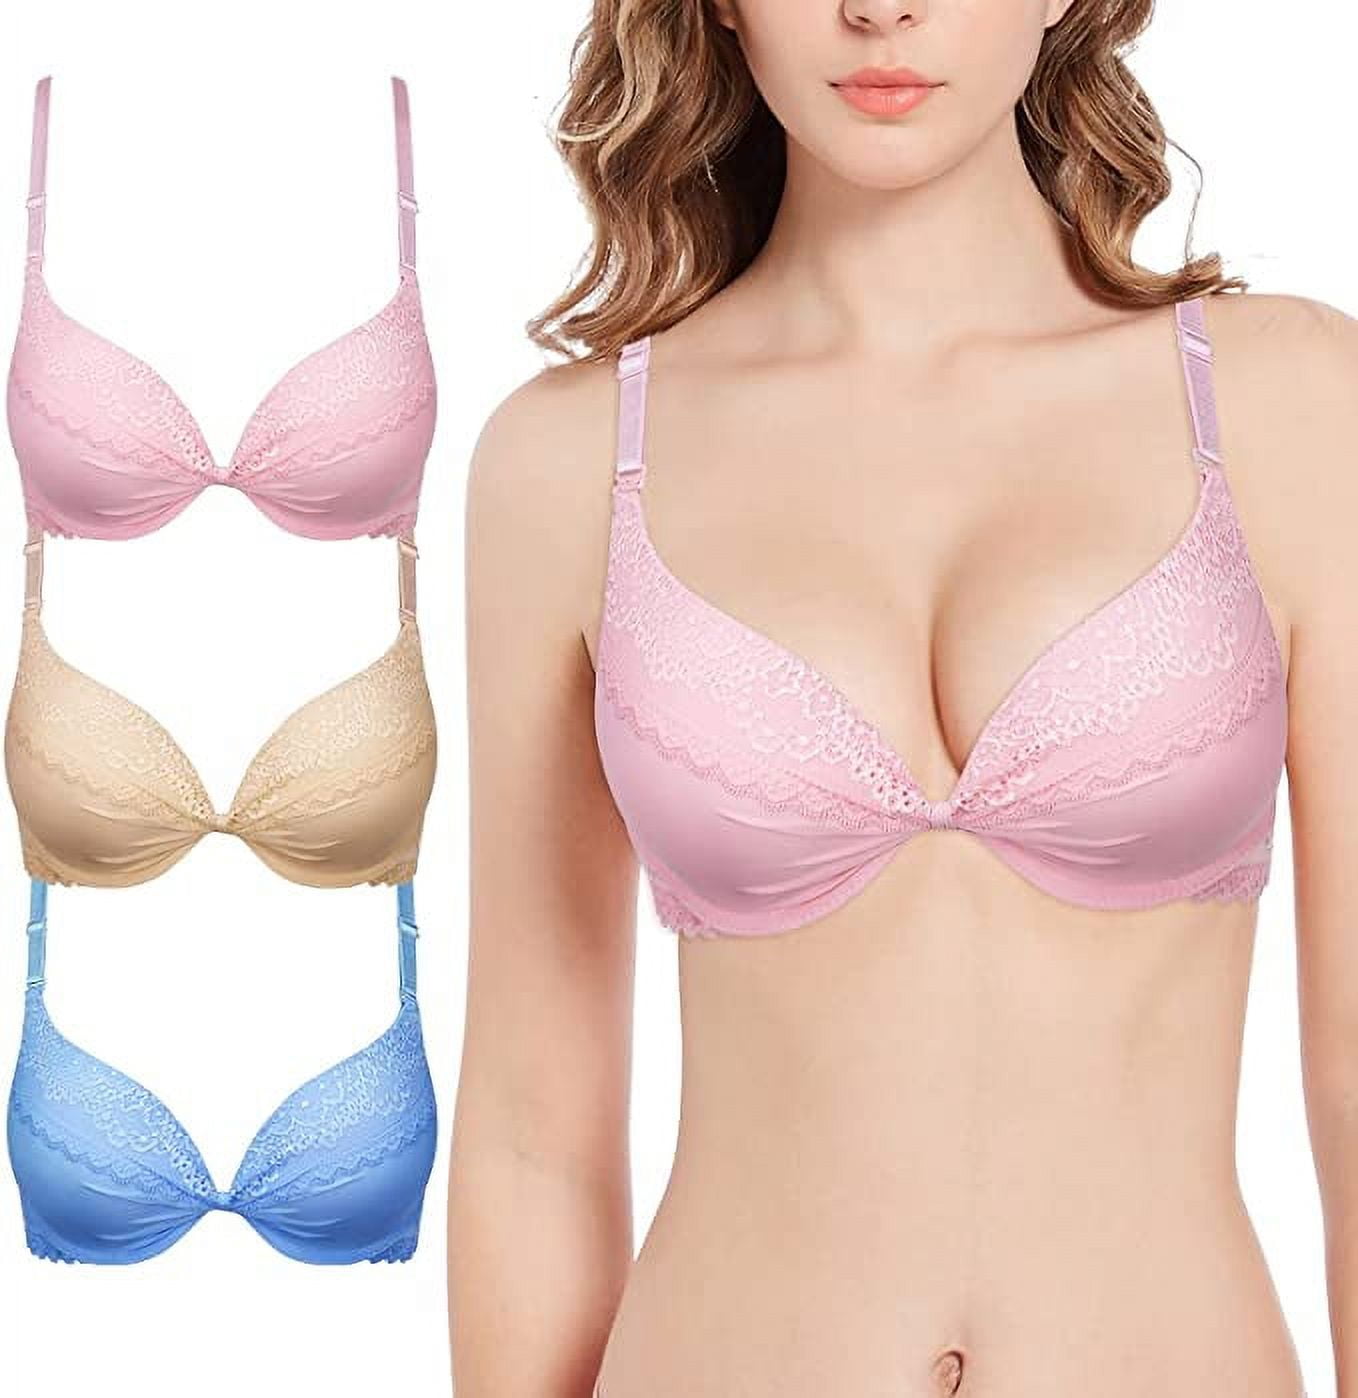 Bra for Women Adjustable Shoulder Strap Thin Underwear Comfortable Push Up  Side Collection Lace Underwear Hot Pink 42 